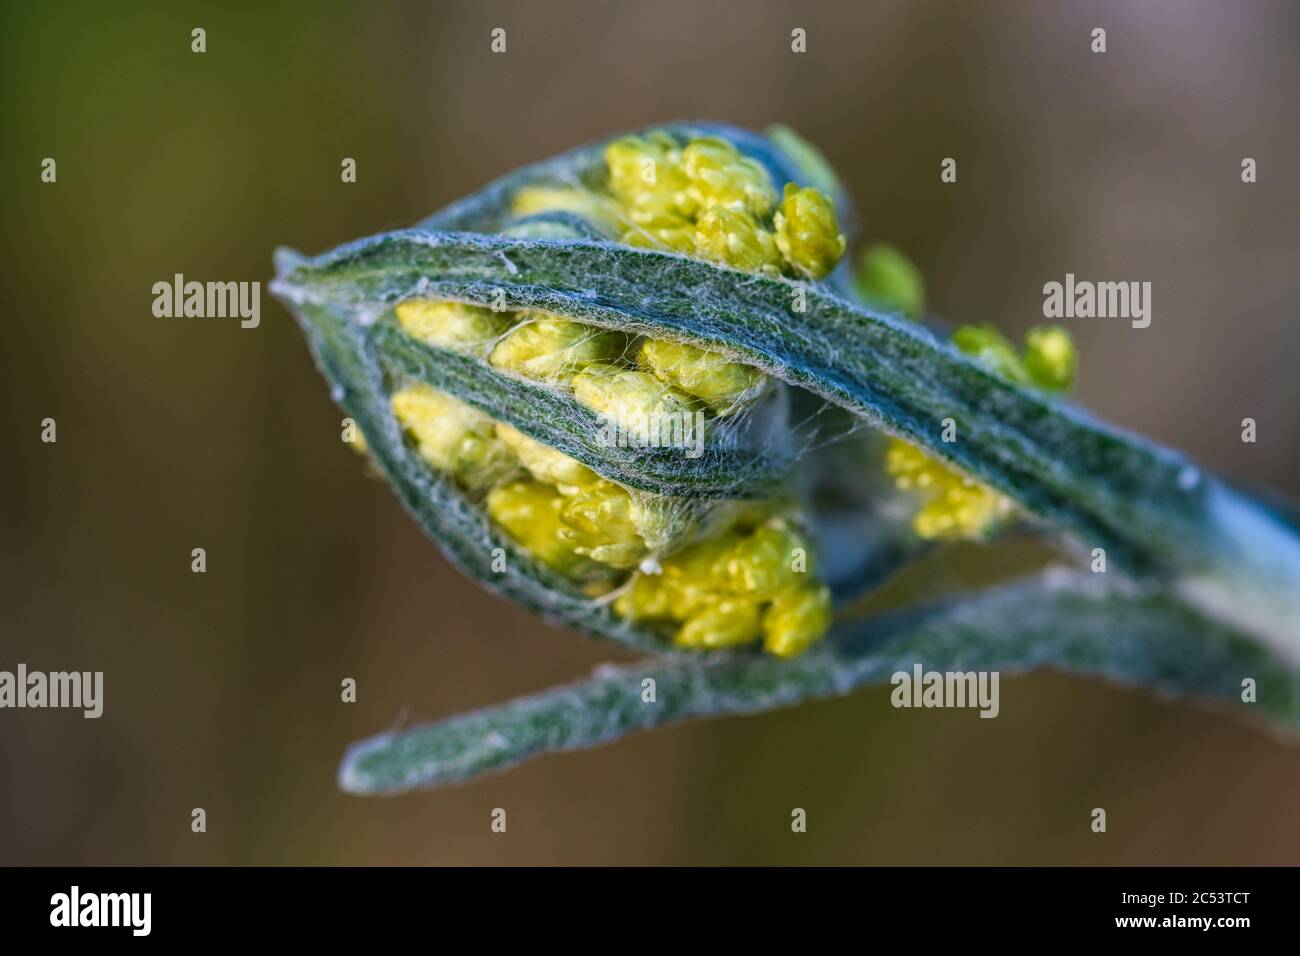 Dwarf everlast immortelle macro of golden yellow florets, flower buds and wooly fuzzy leaves, isolated with blurred background Stock Photo